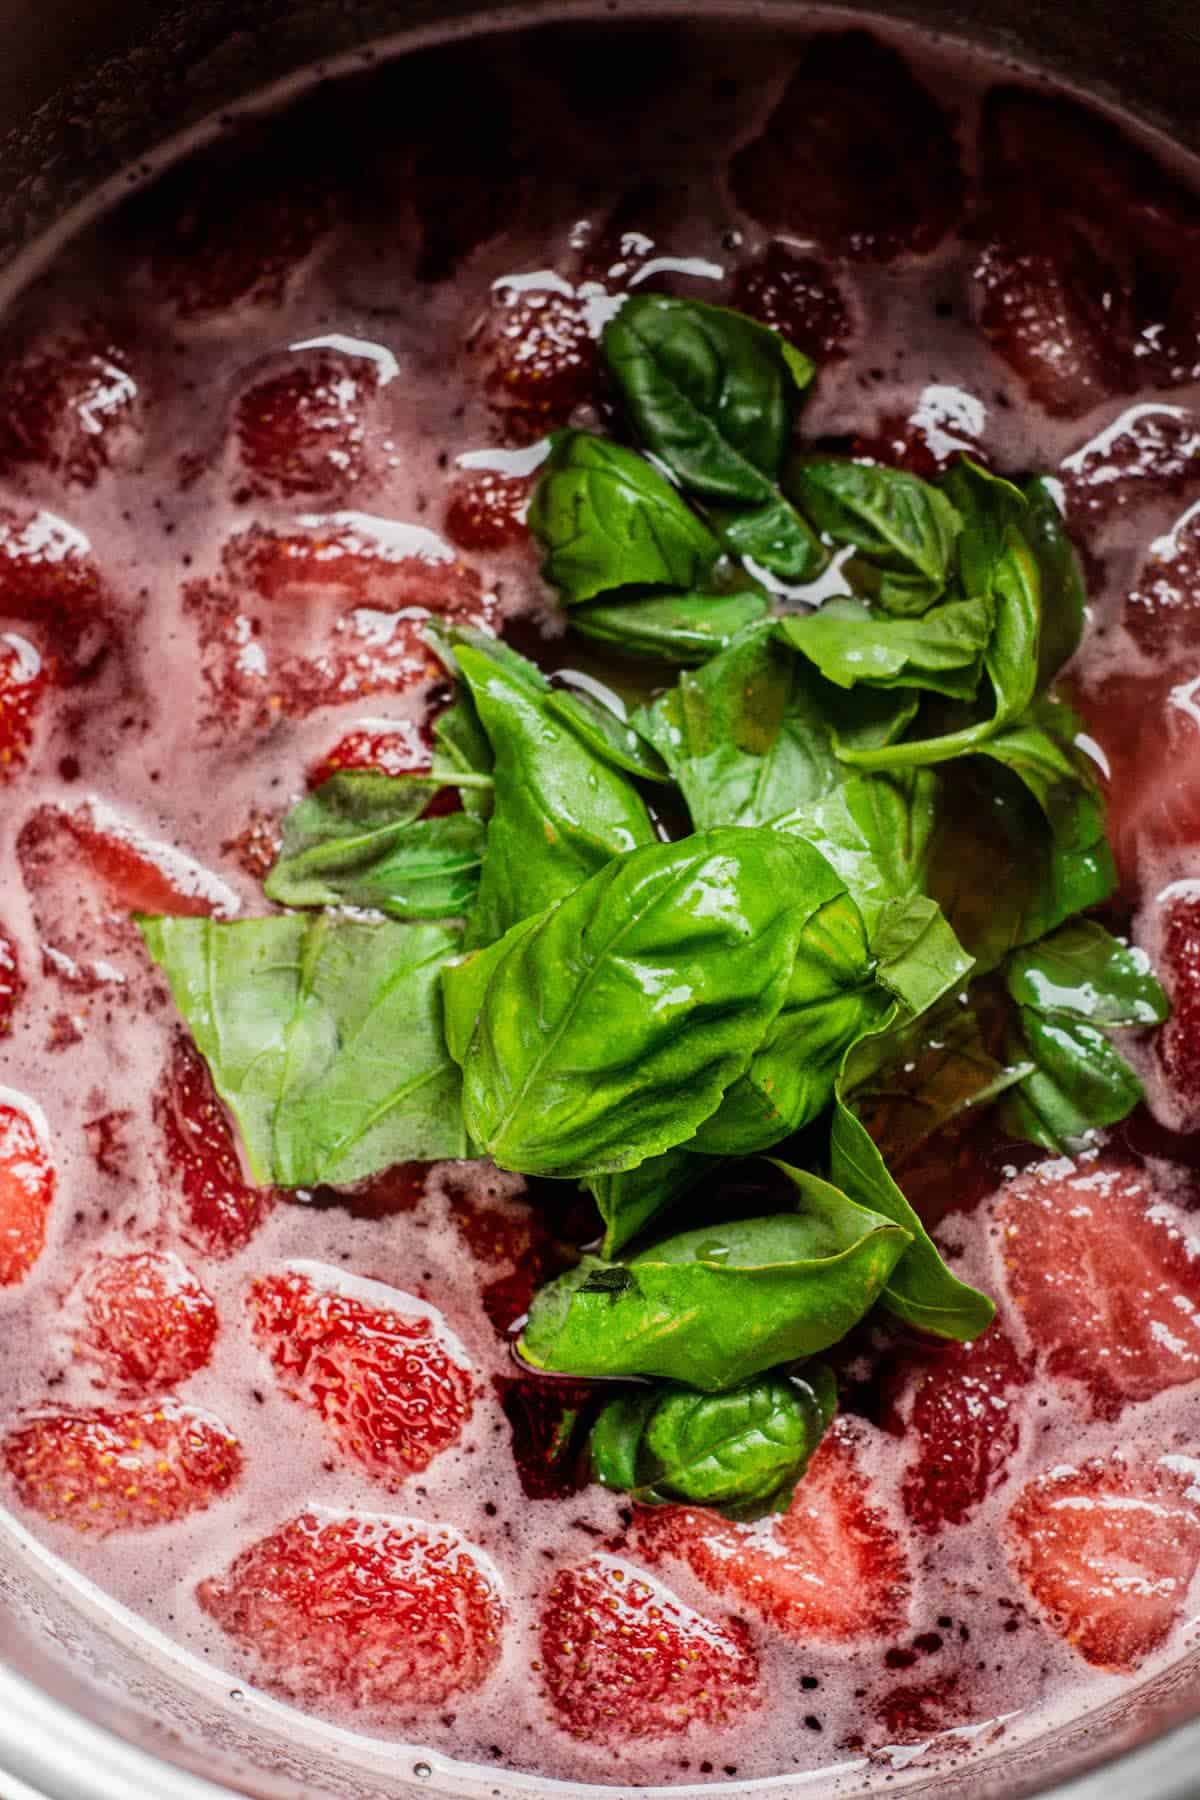 torn basil leaves in strawberry syrup.